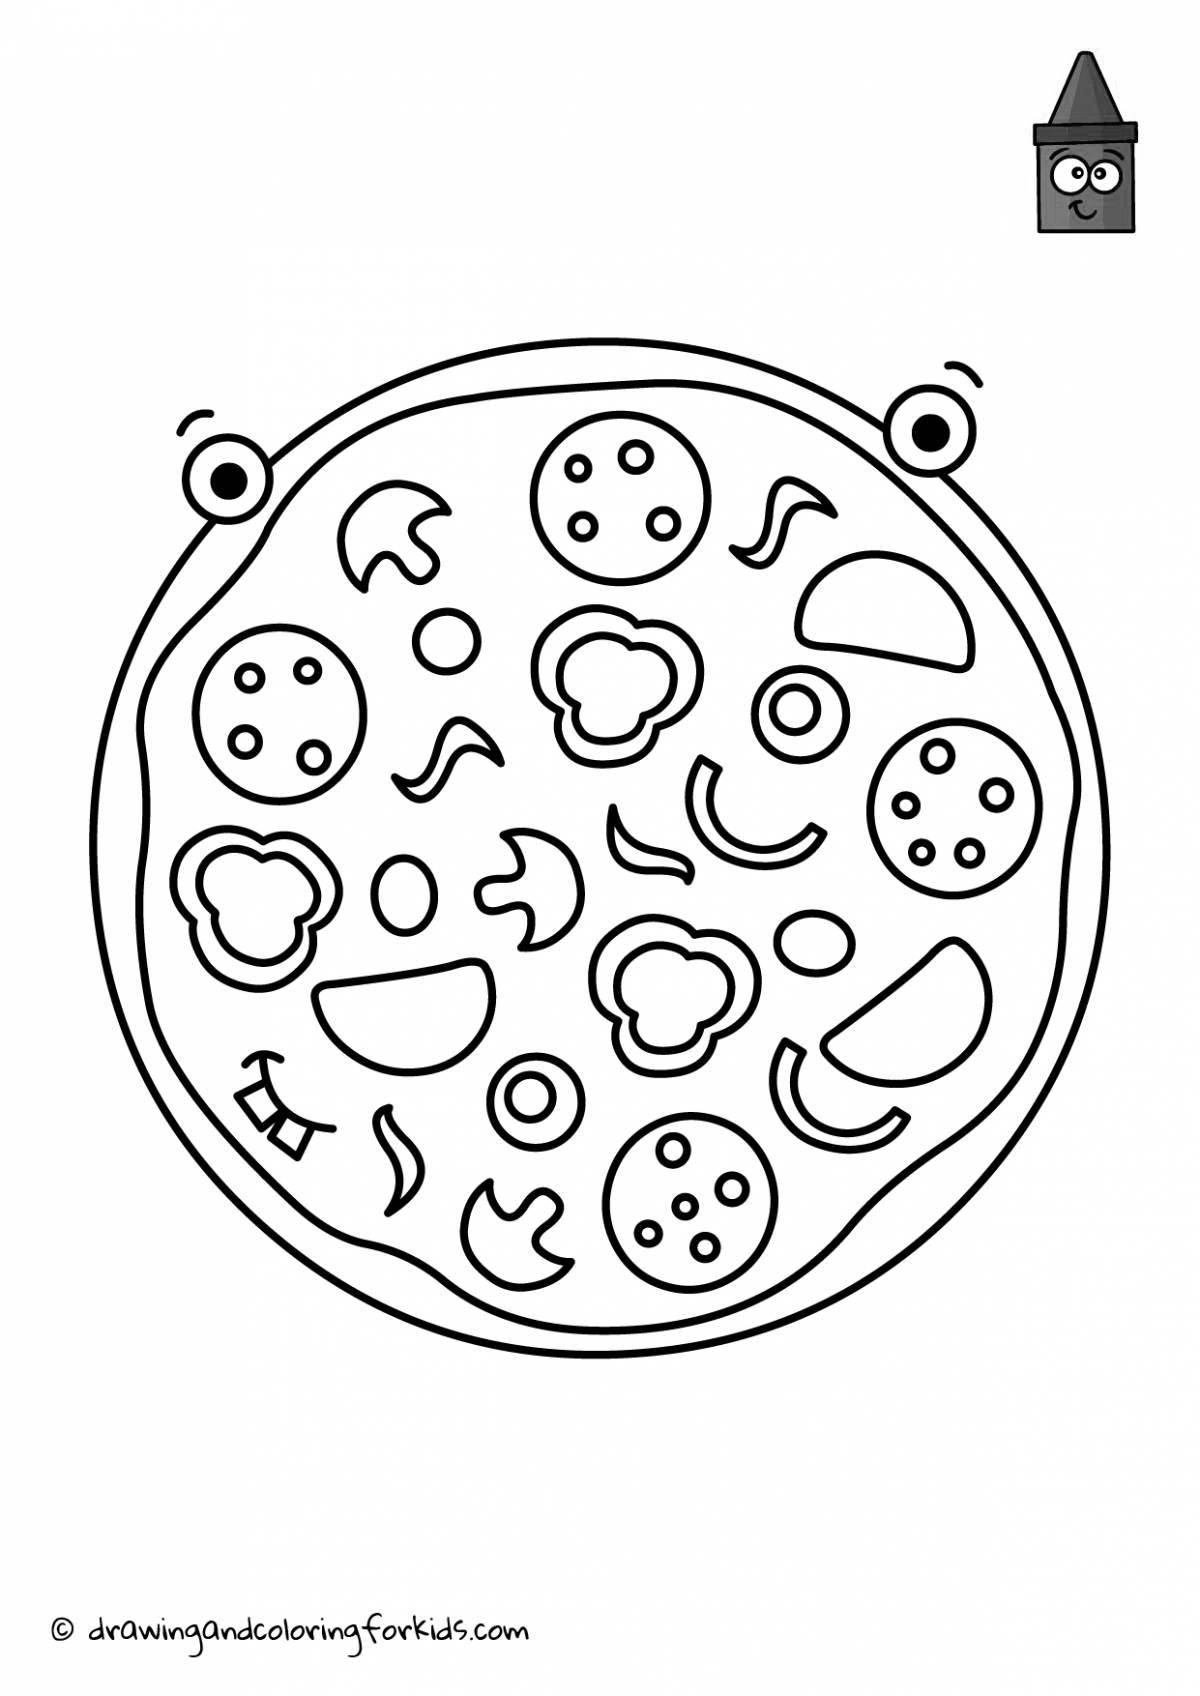 Adorable pizza ingredients coloring page